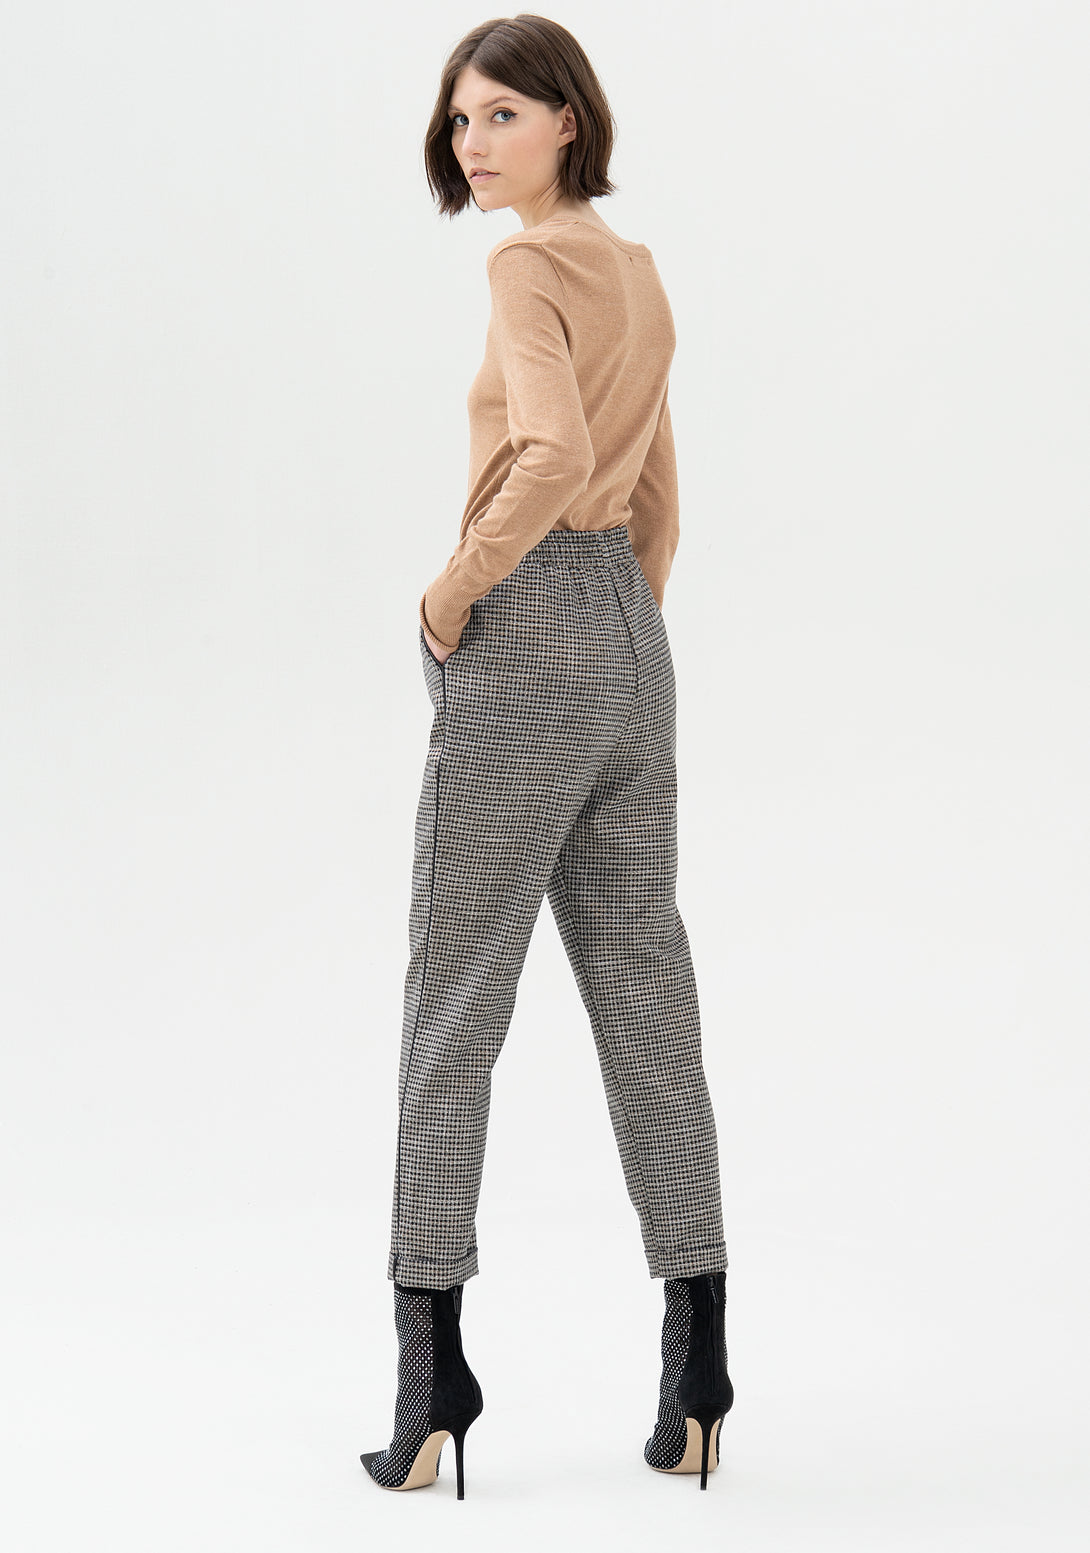 Jogger pant regular fit made in pied de poule fabric